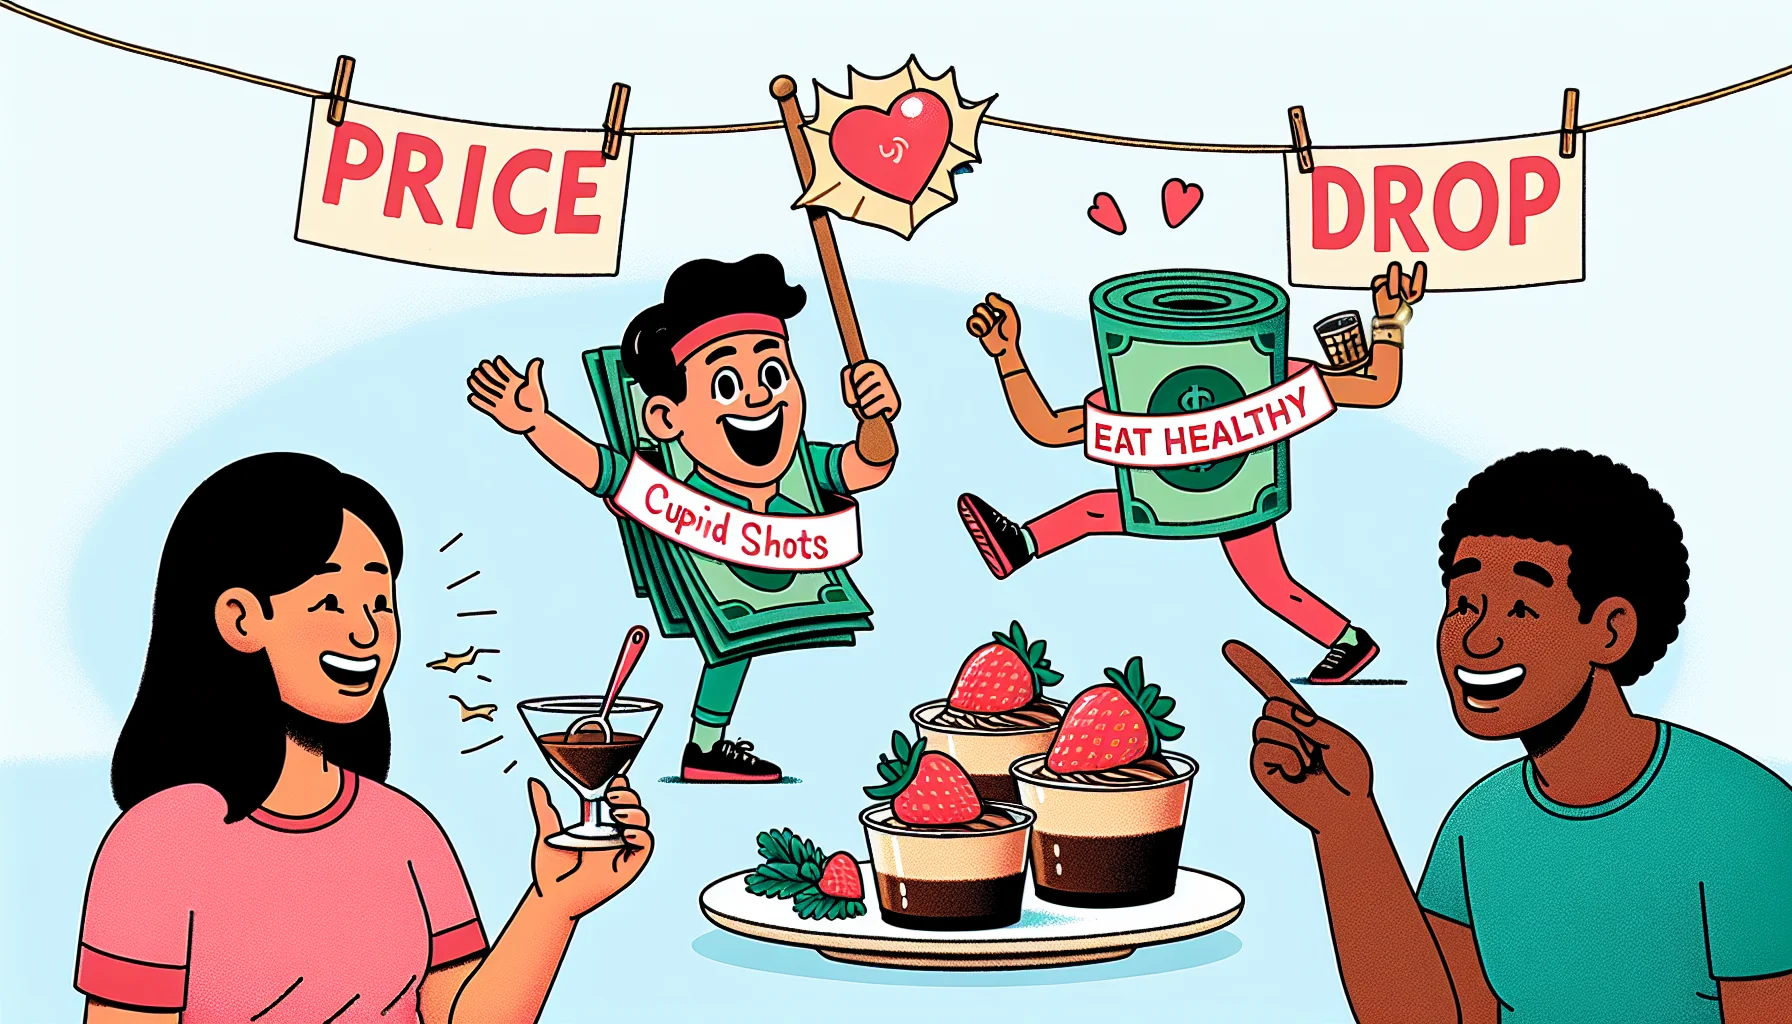 Illustrate a quirky scene where there are 'Cupid Shots: Mini Chocolate Mousse with Strawberries' creatively arranged. Add a backdrop of a friendly 'price drop' signage emphasizing affordability. There's an animated dollar bill with a bright smile and a headband, doing aerobic exercises. He holds a banner saying, 'Eat Healthy for Less!' In the scene, there's an Asian woman and a Black man, laughing and ready to enjoy the dessert. The Asian woman is about to take a bite from her spoon while the man is cheerfully gesturing towards the price drop sign.